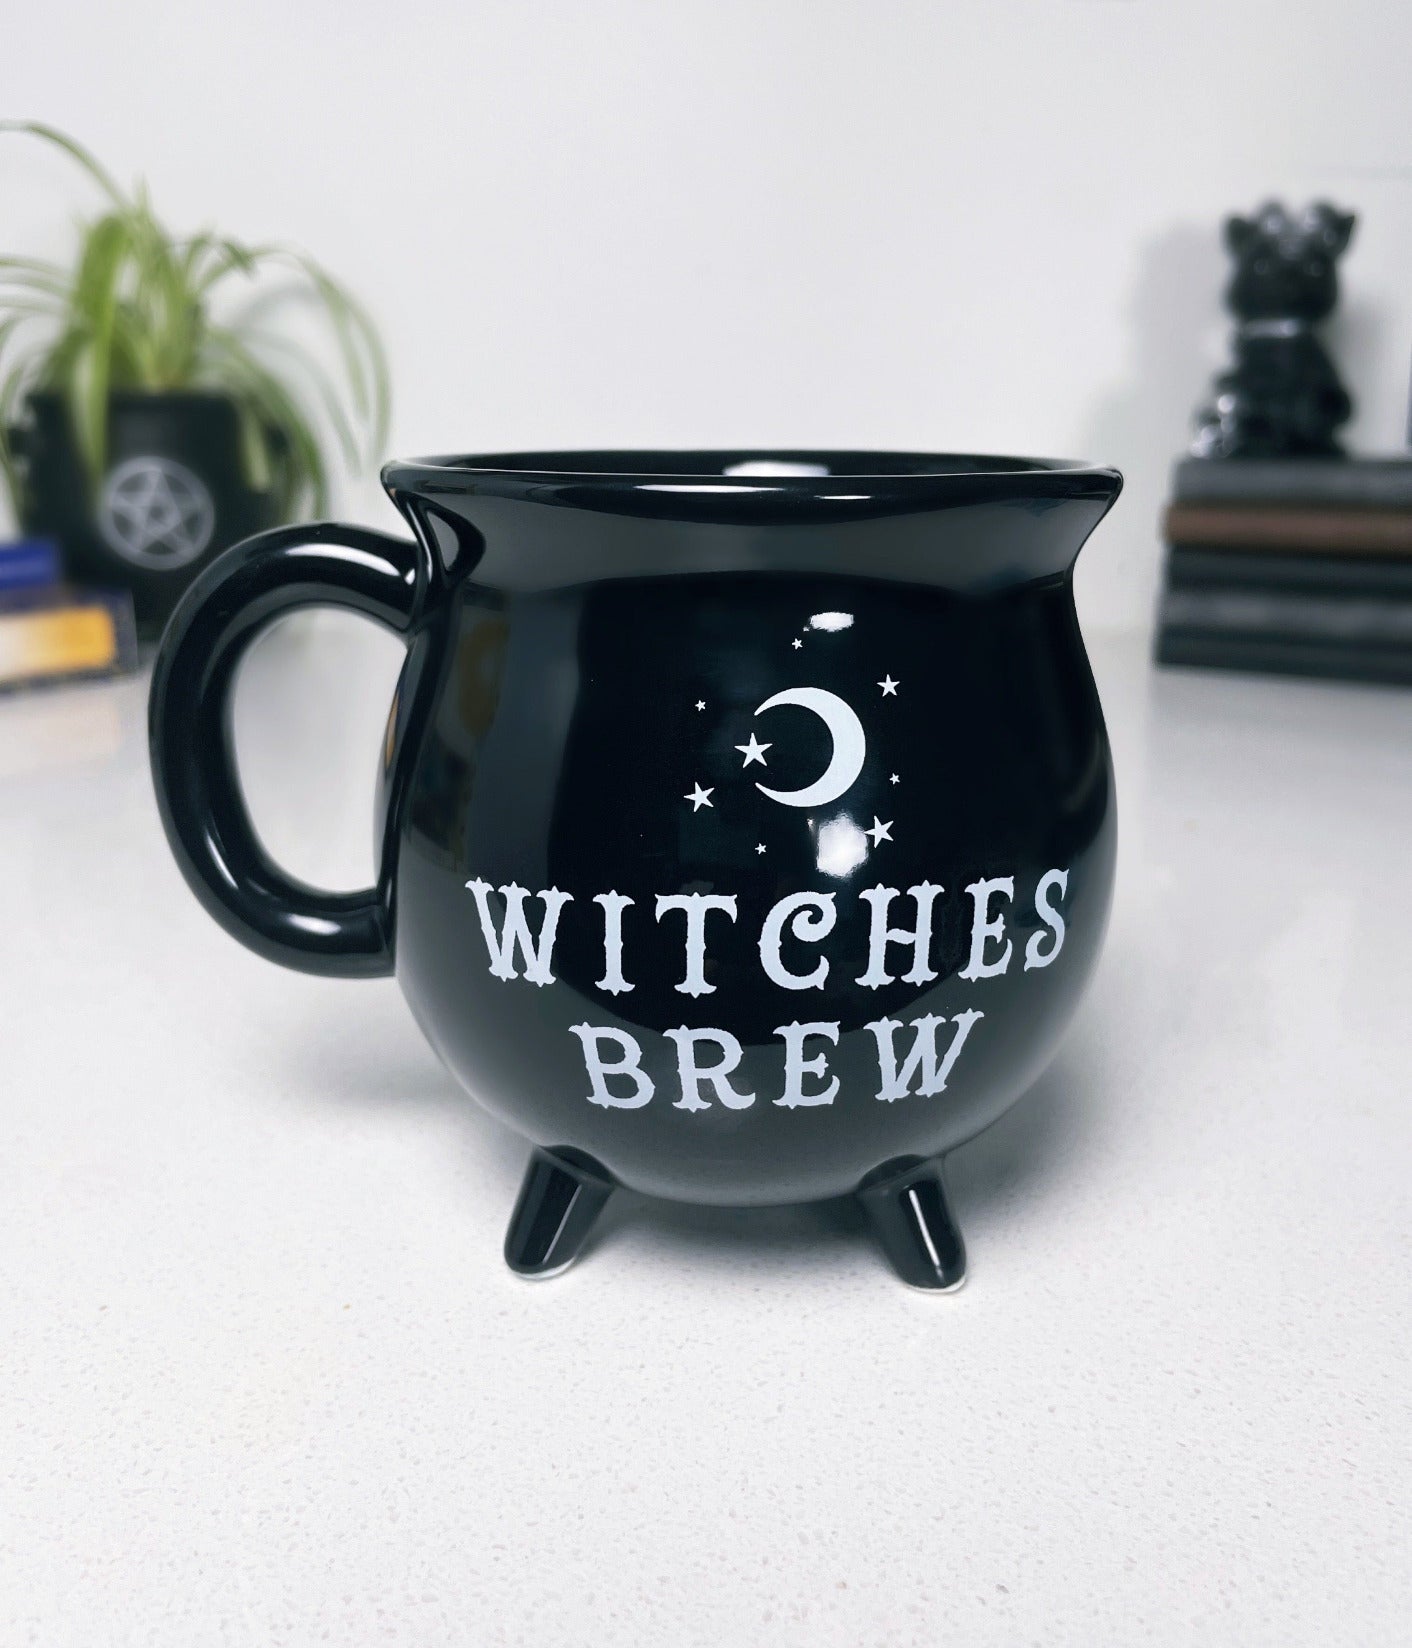 A black ceramic cauldron-shaped mug with a white label that says "Witches Brew" on the side. 